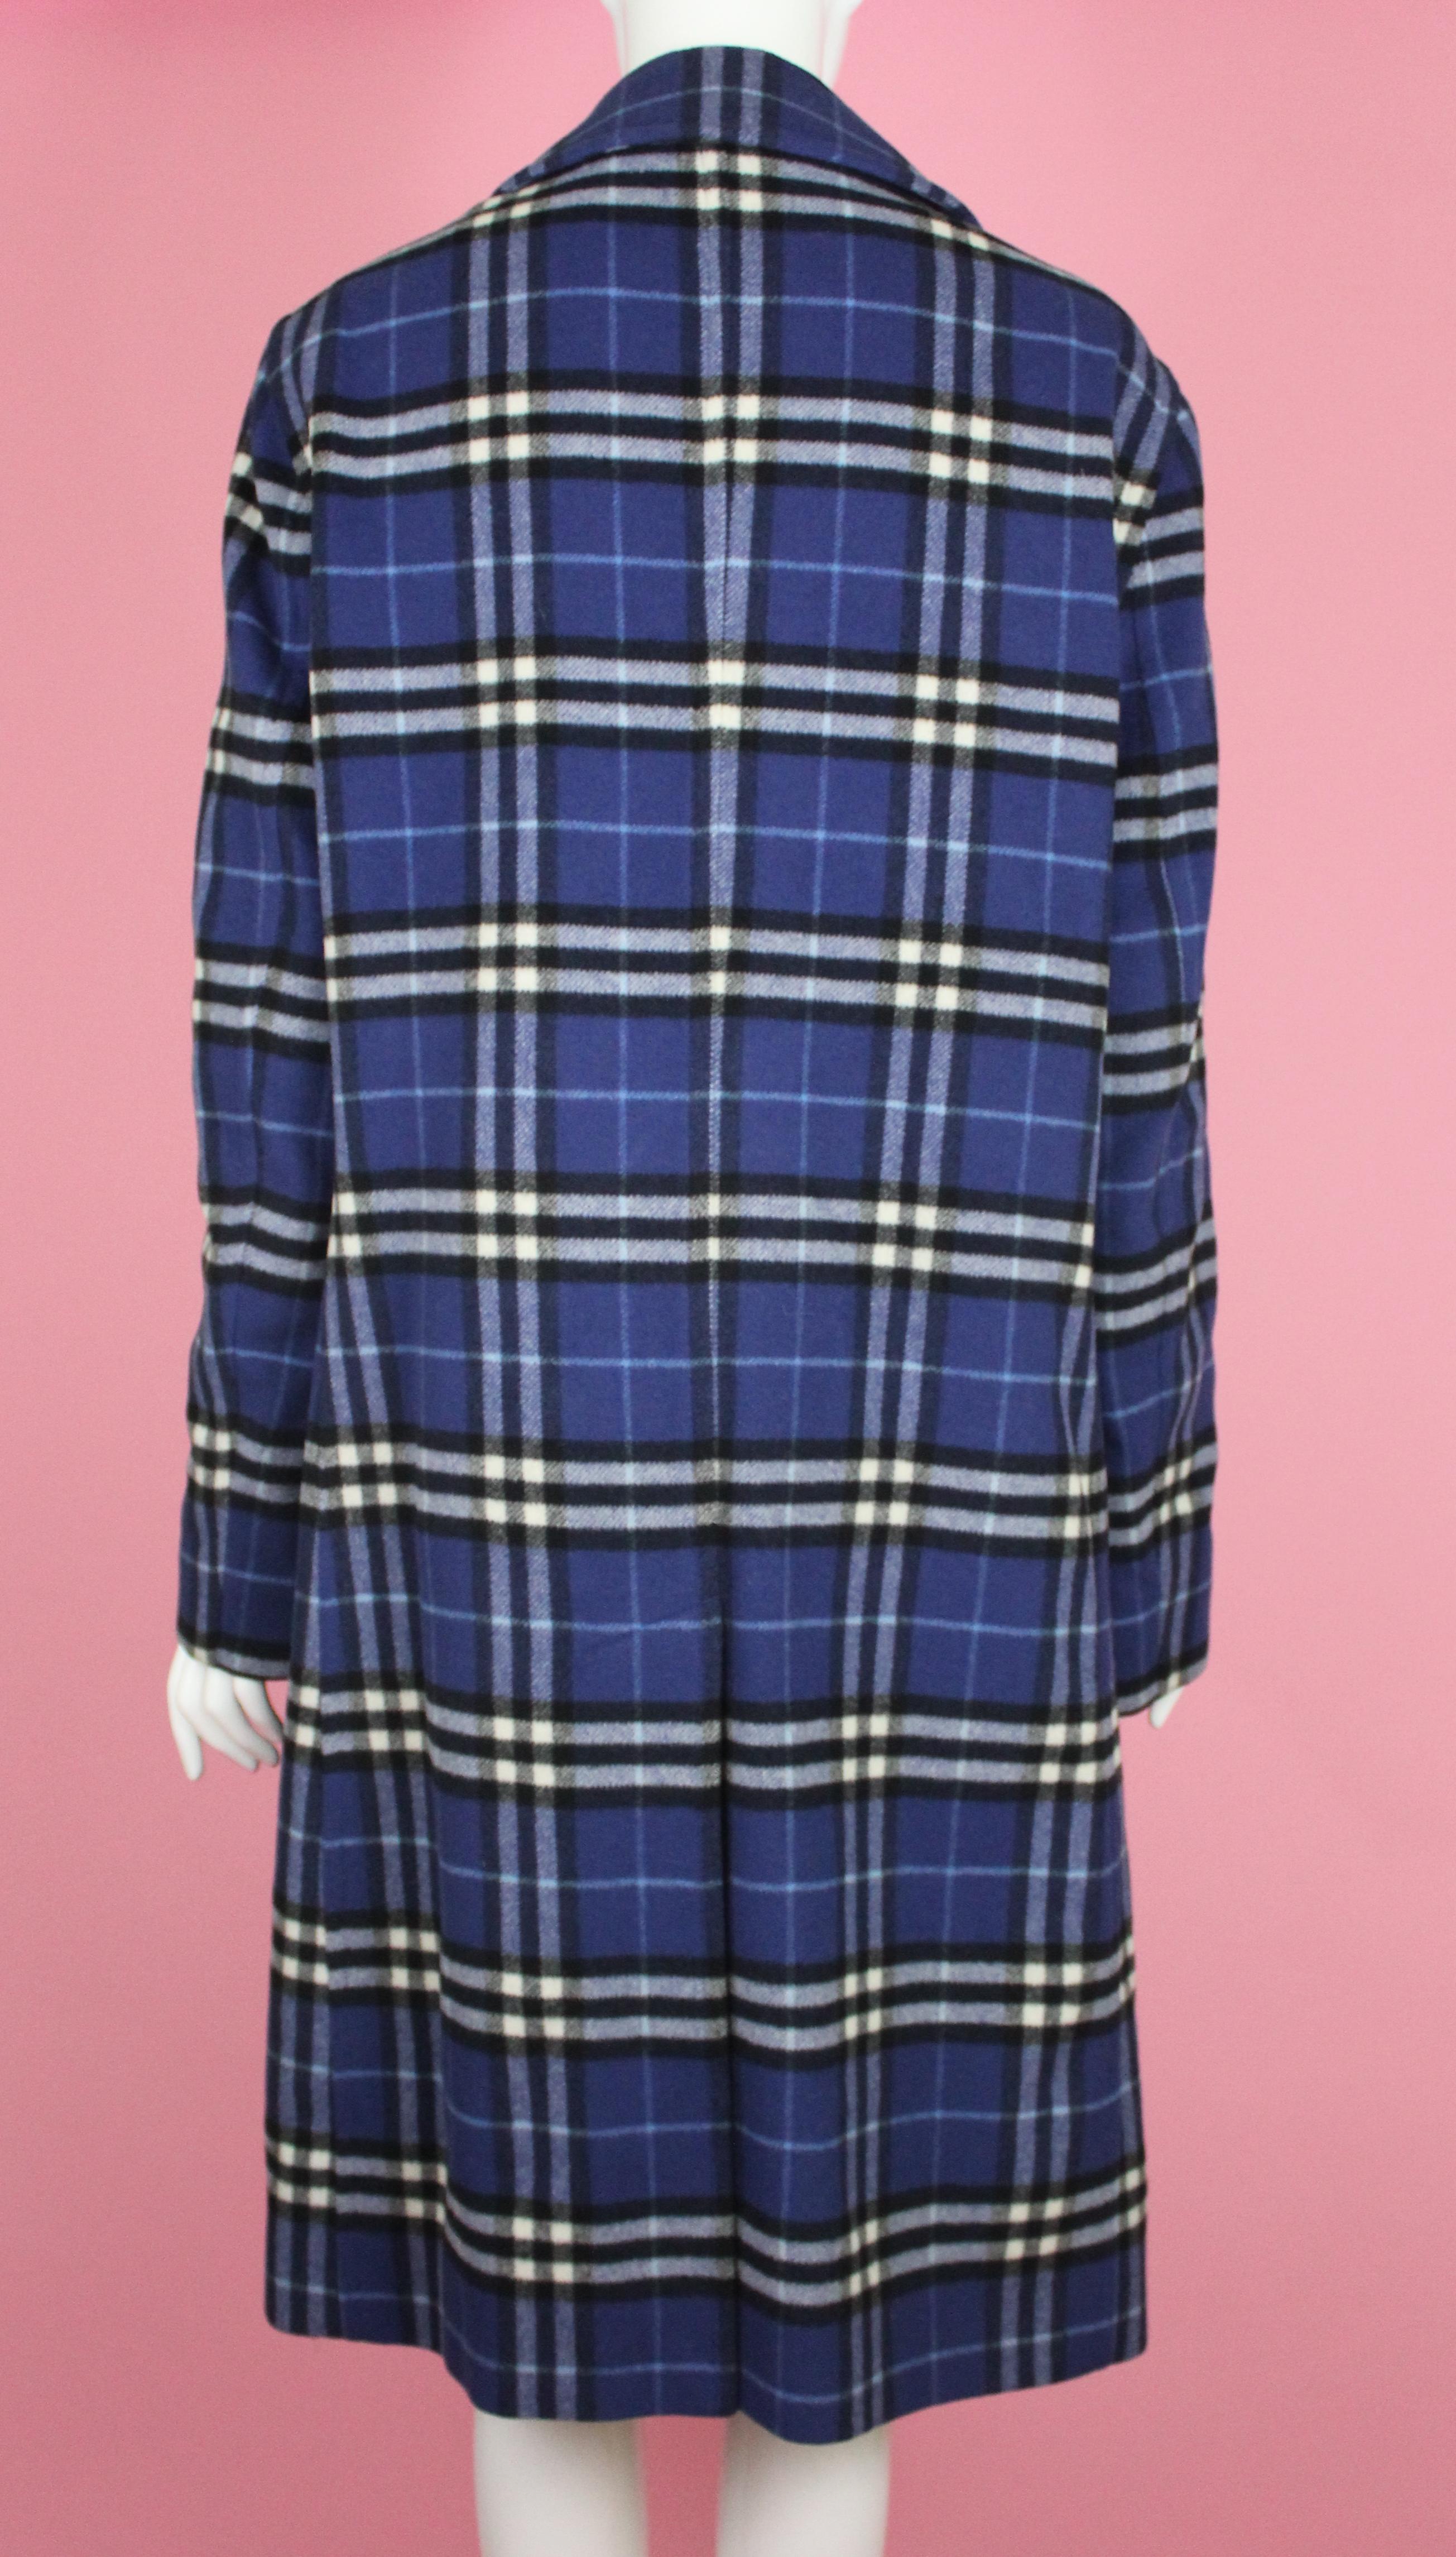 Burberry Women's Double Breasted Coat in Blue Check, c. 2000's, size 6 US For Sale 2